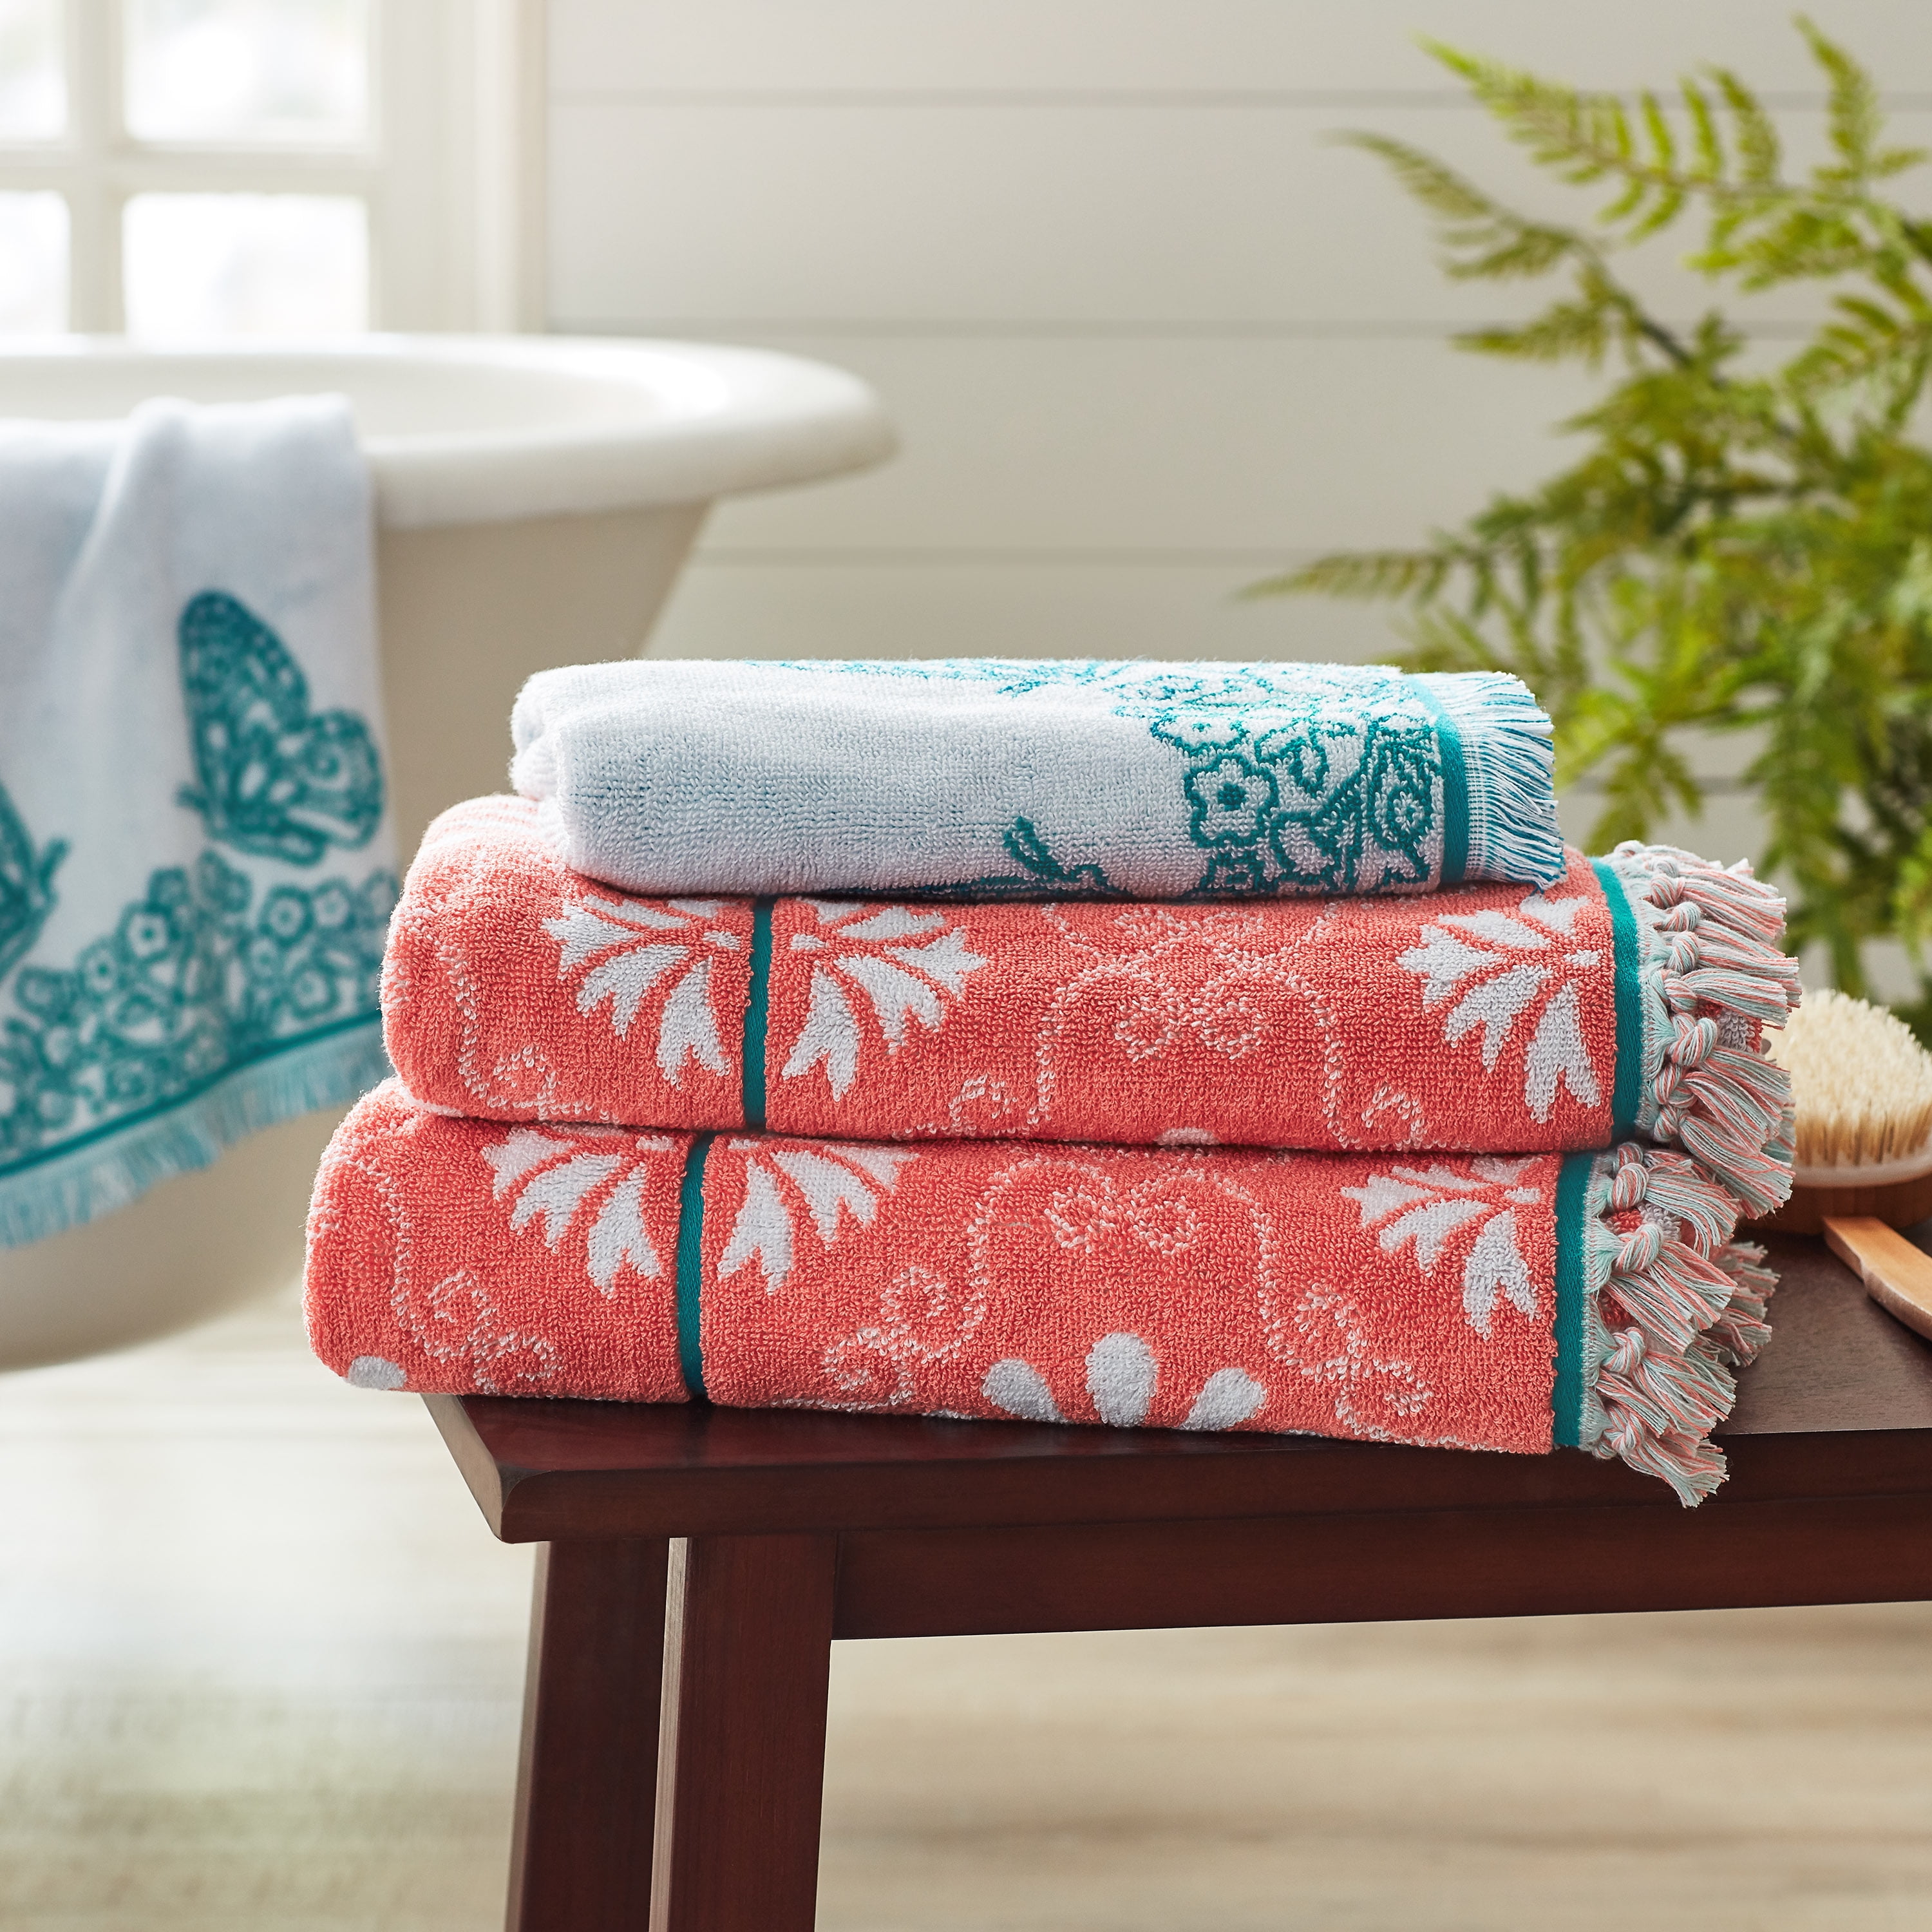 The Pioneer Woman Bath Collection at Walmart - Where to Buy Ree